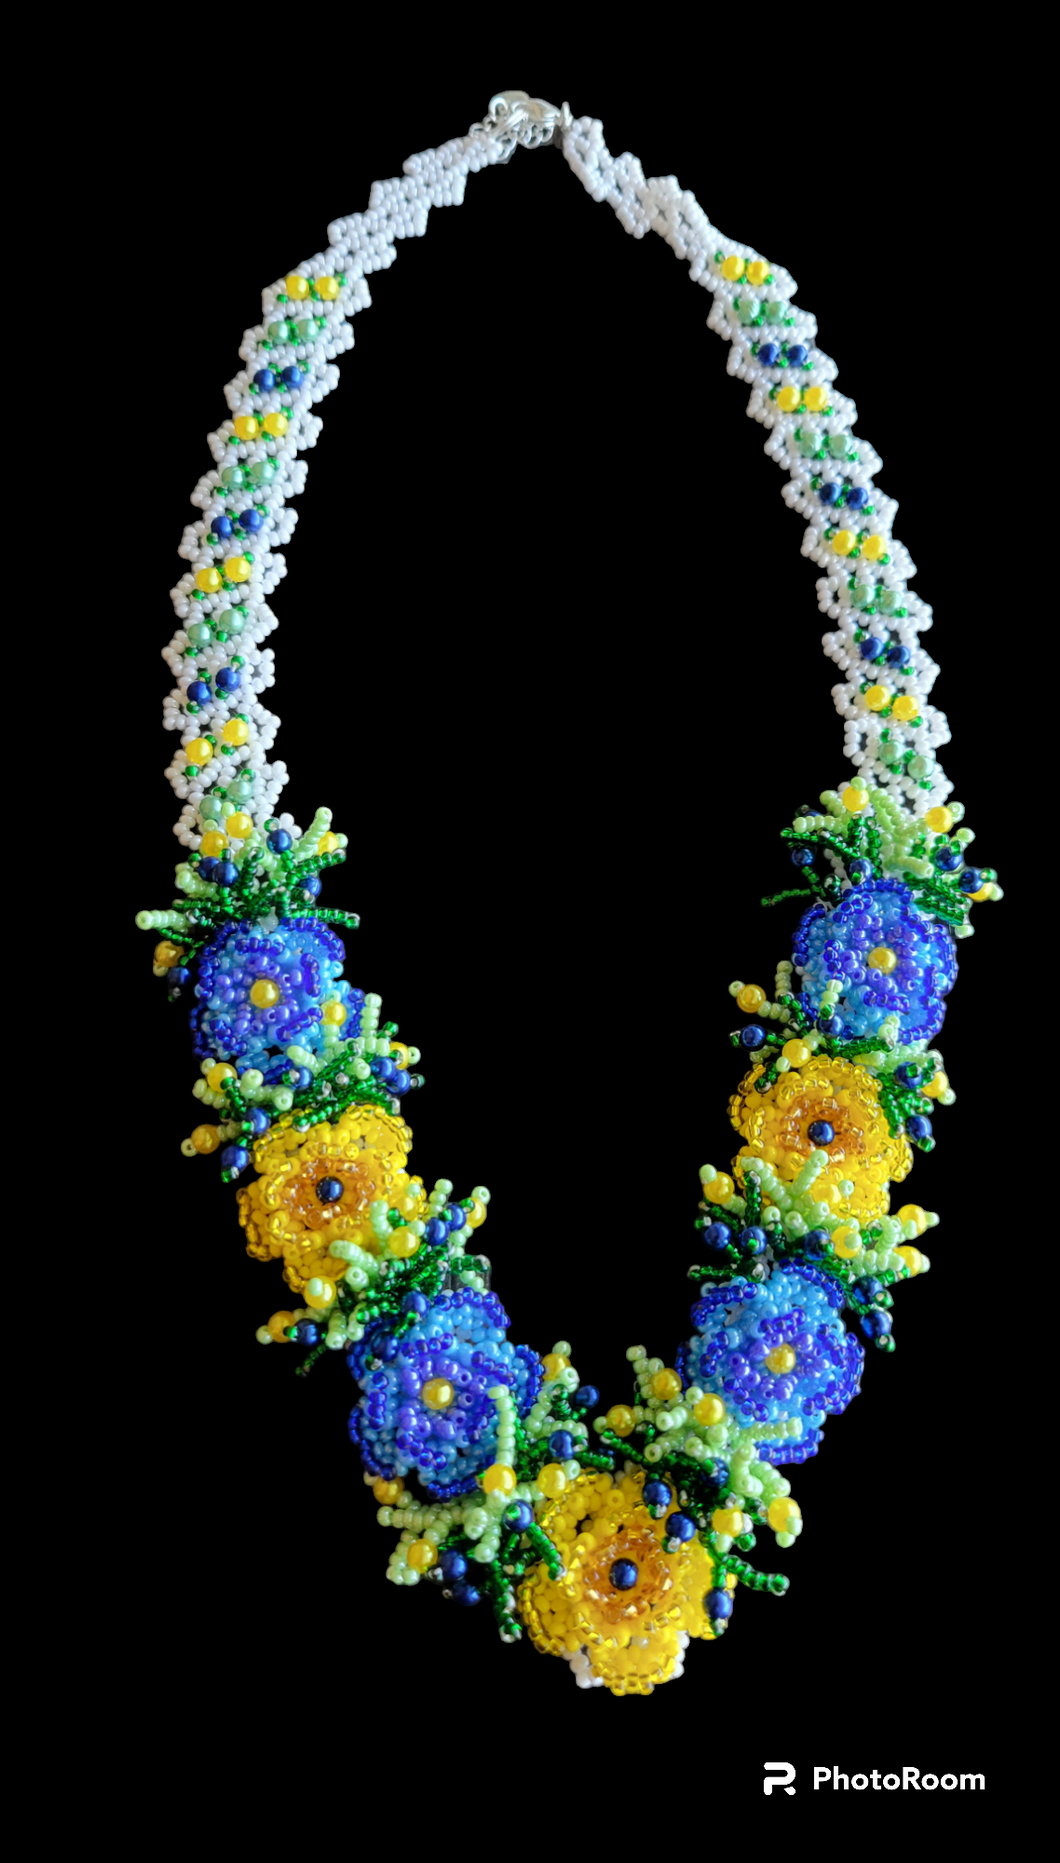 3D Flower necklace custom for Cindy - Lora's Treasures